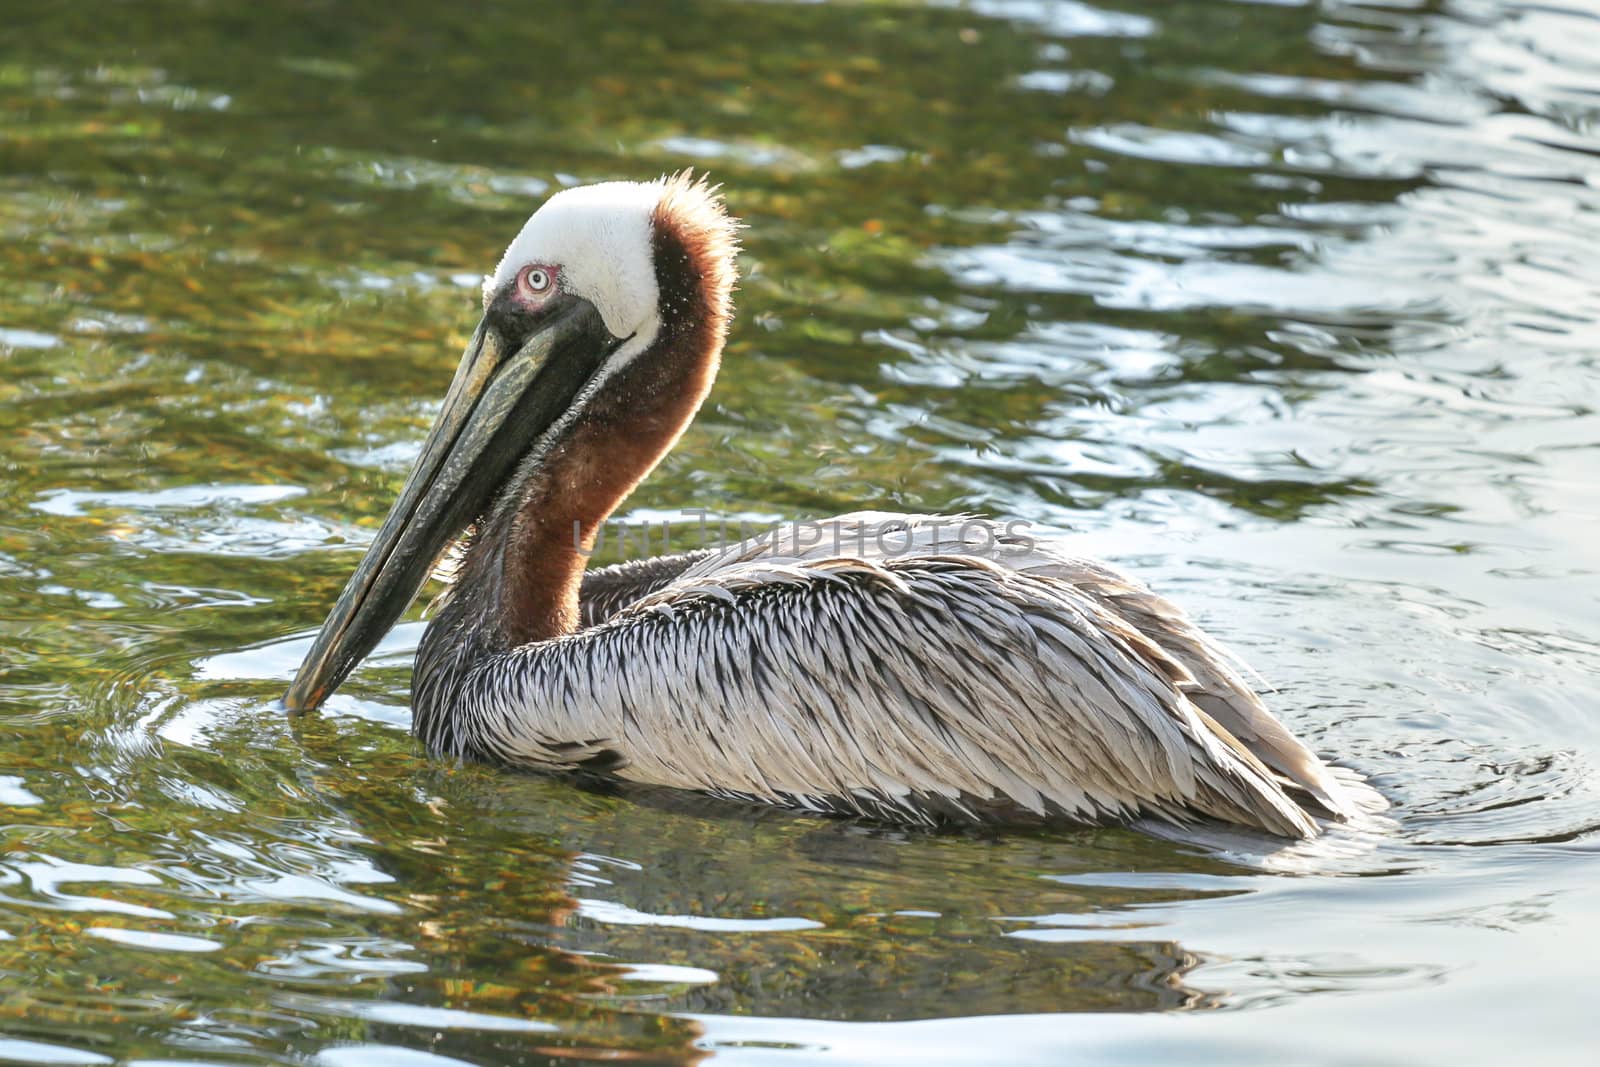 A pelican with a large beak swimming in a pond at a park in South Africa